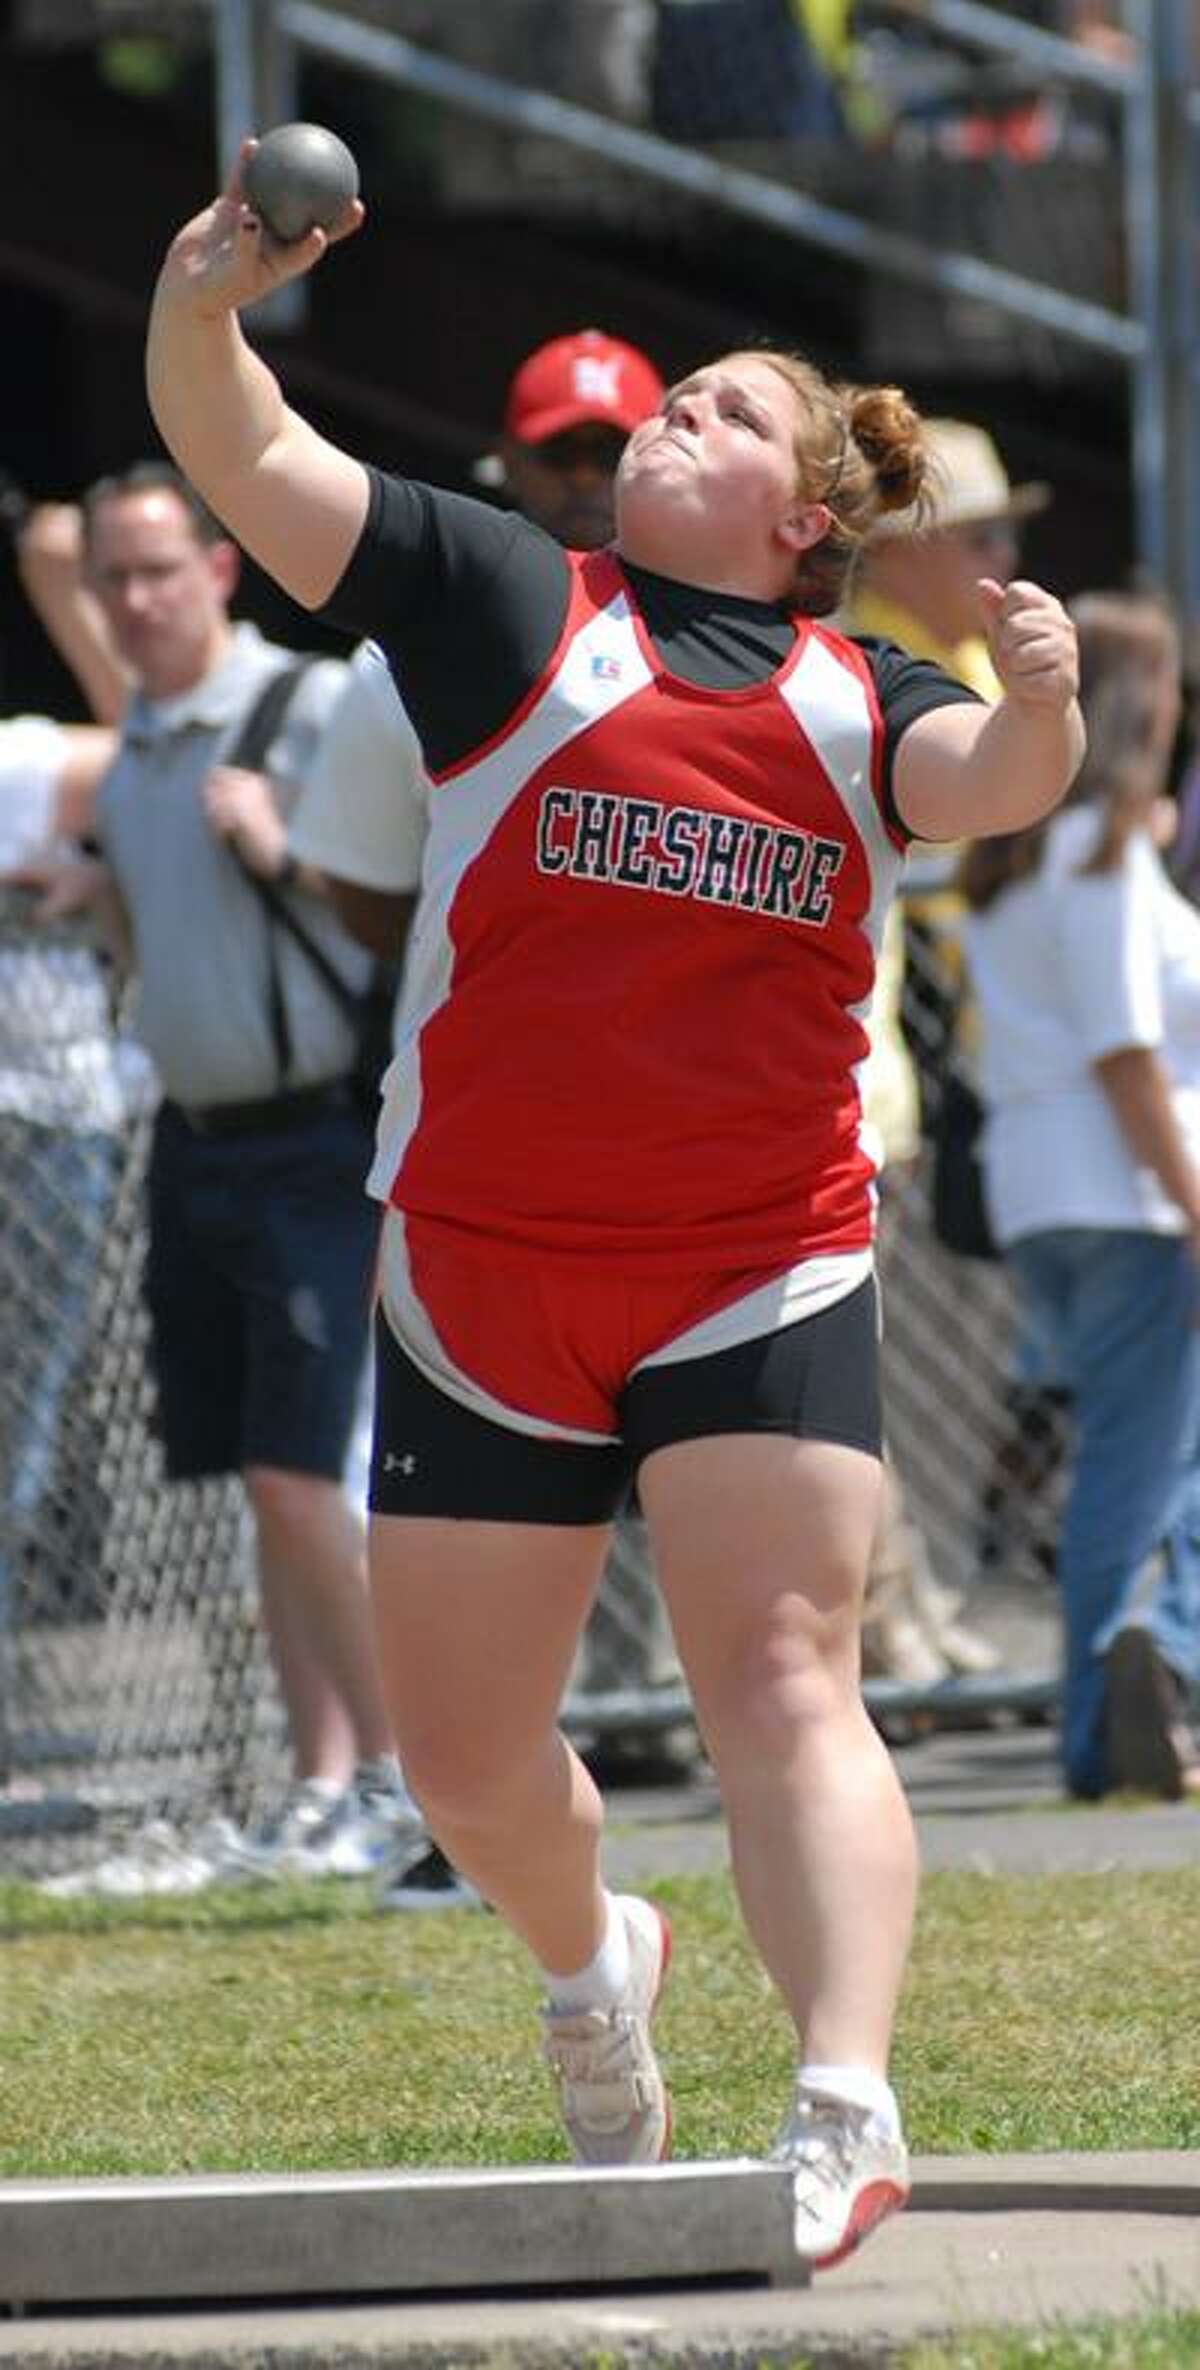 Photography by PETER HVIZDAK ph2103 #1876New Britain, Connecticut- June 7, 2010: Rachel Aliotta of Cheshire High School throws the shot put a distance of 43 feet, 5.5 inches for the CIAC State Open Championship Monday at Veterans' Stadium New Britain.